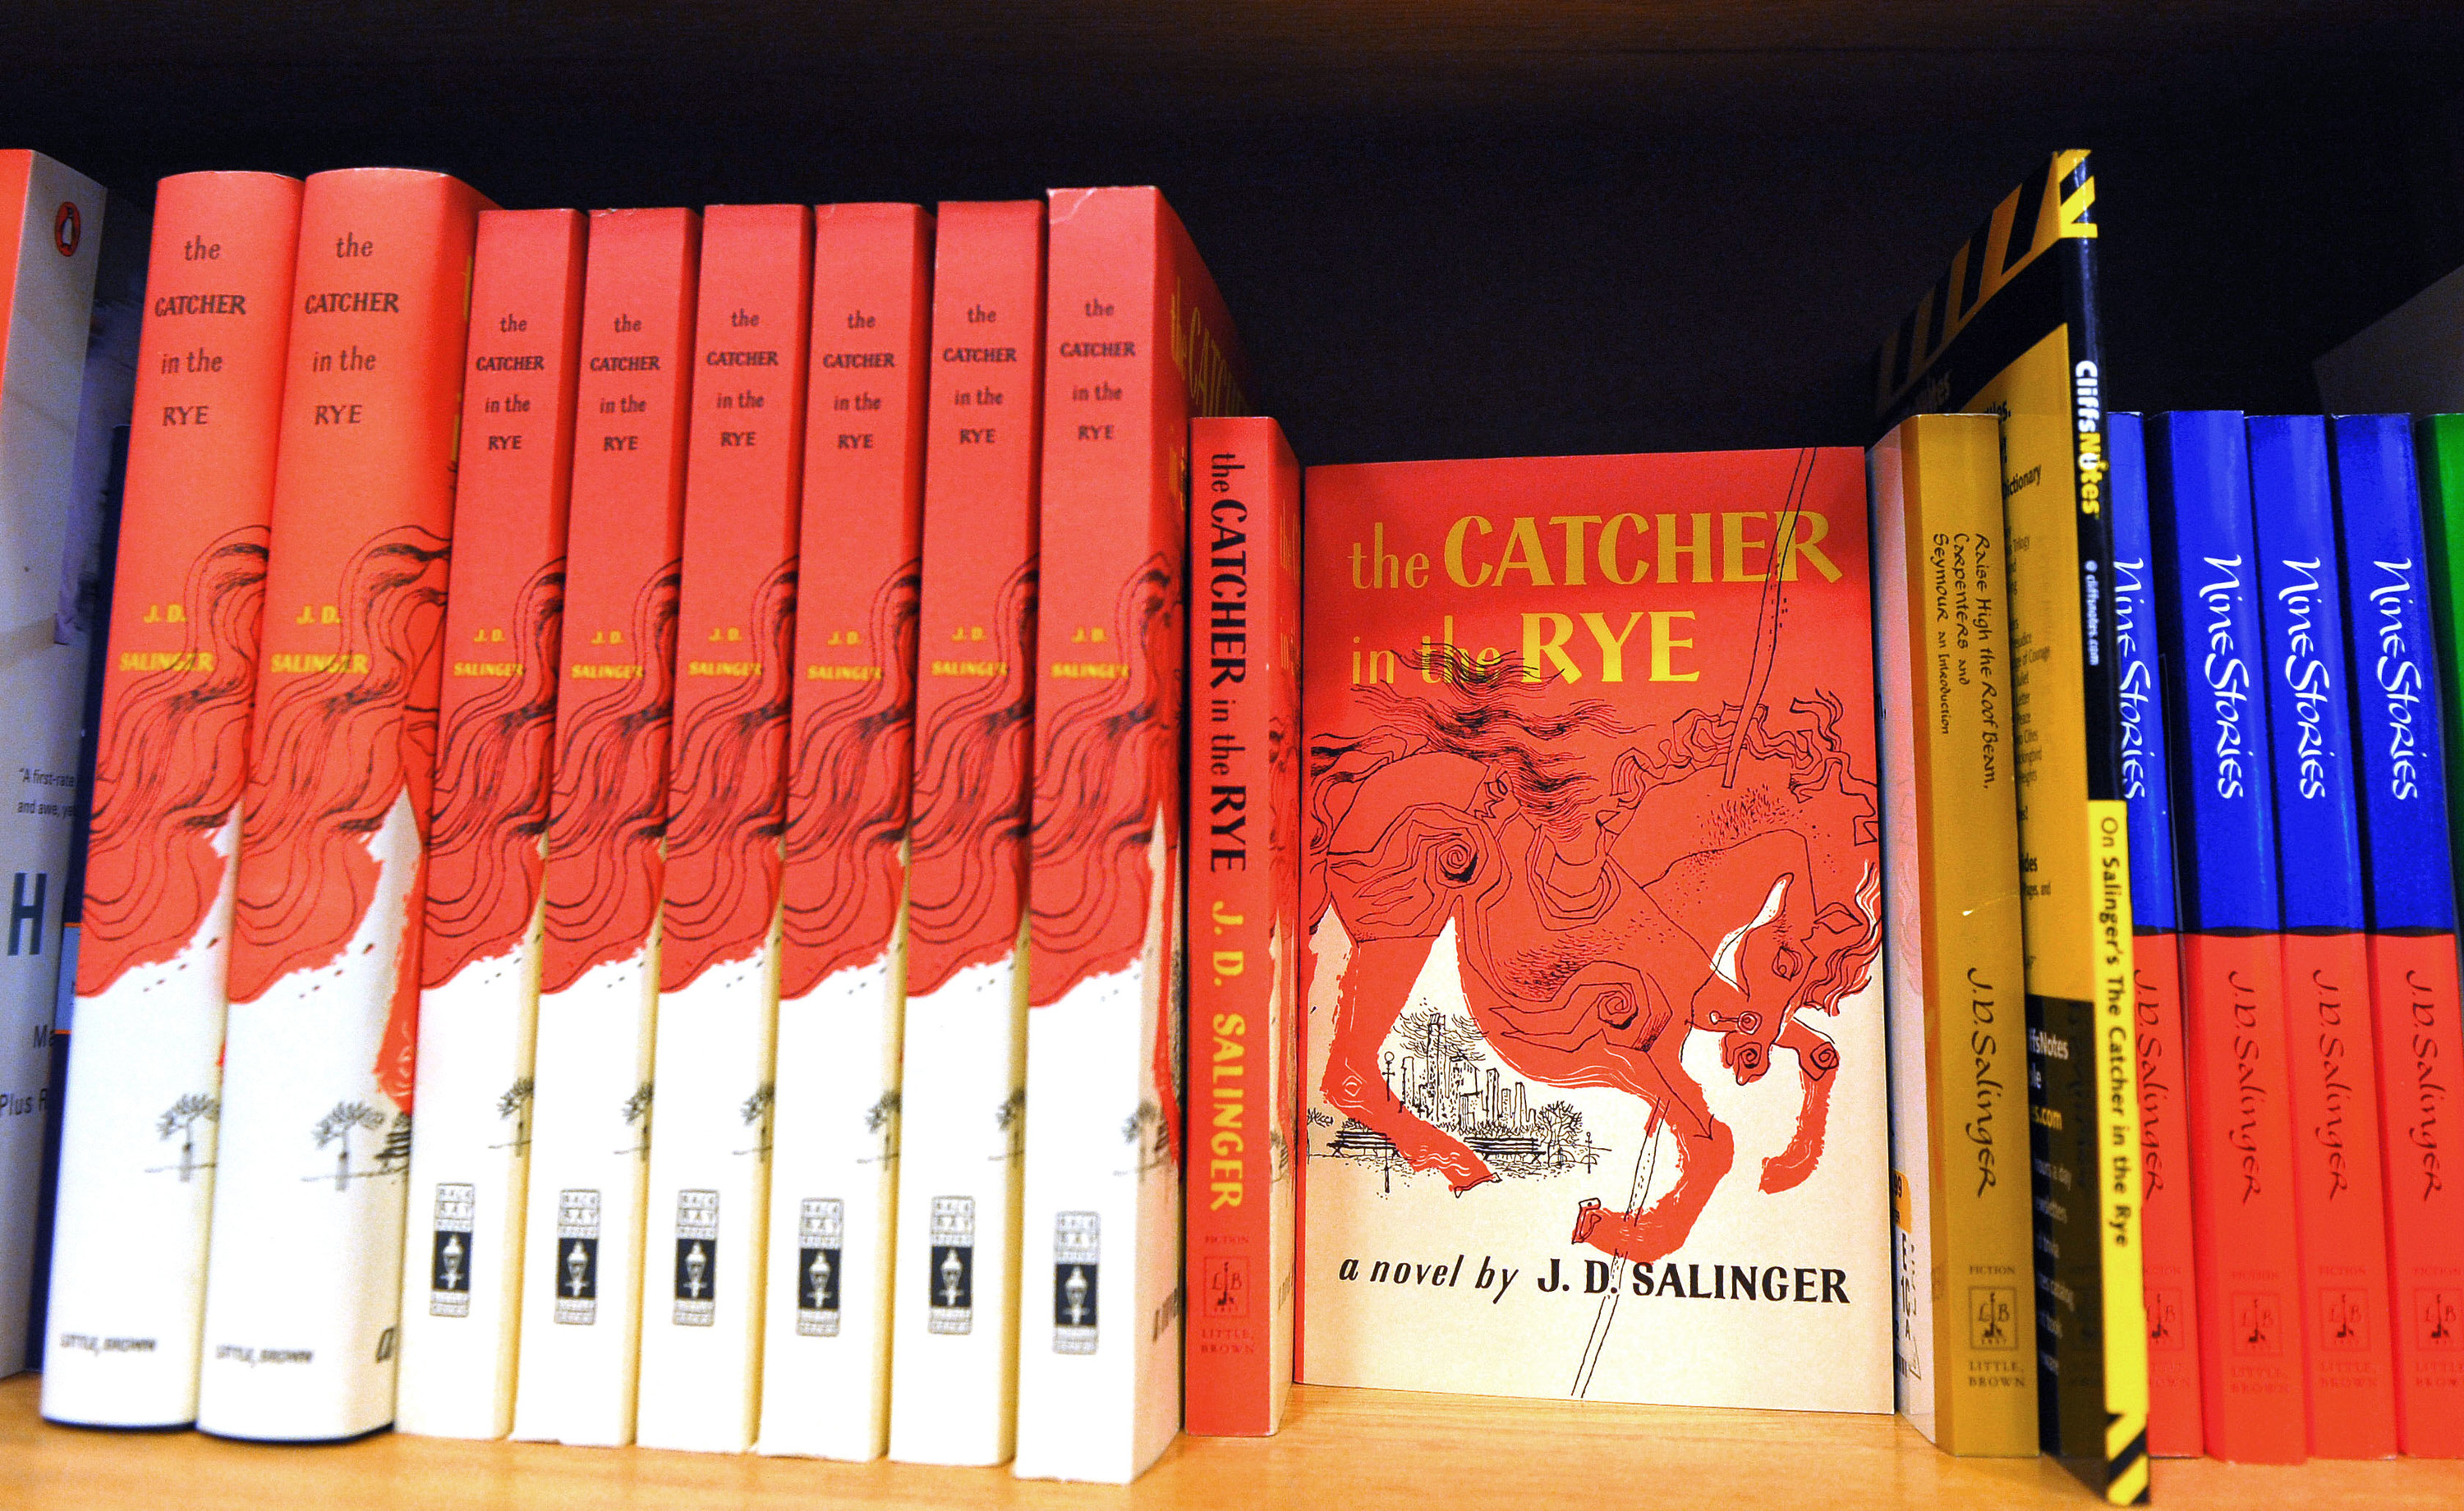 Copies of The Catcher in the Rye on a bookshelf